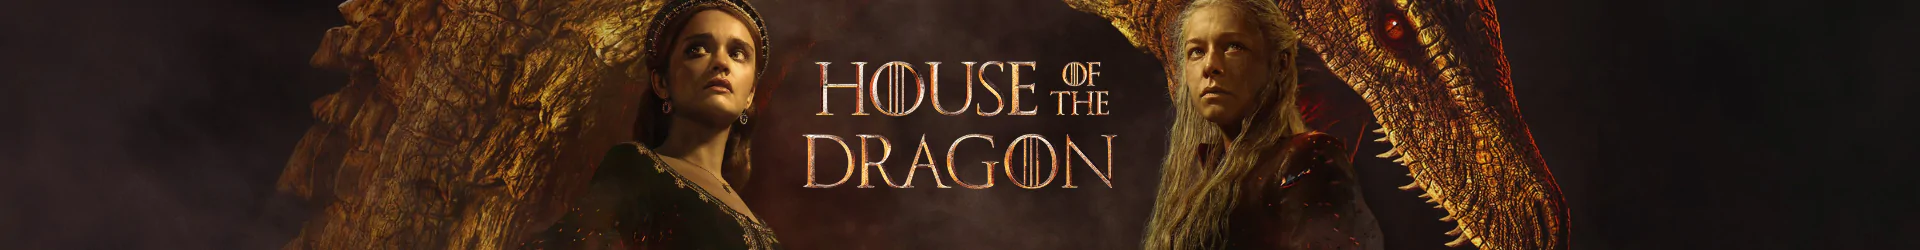 House of the Dragon Produkte banner